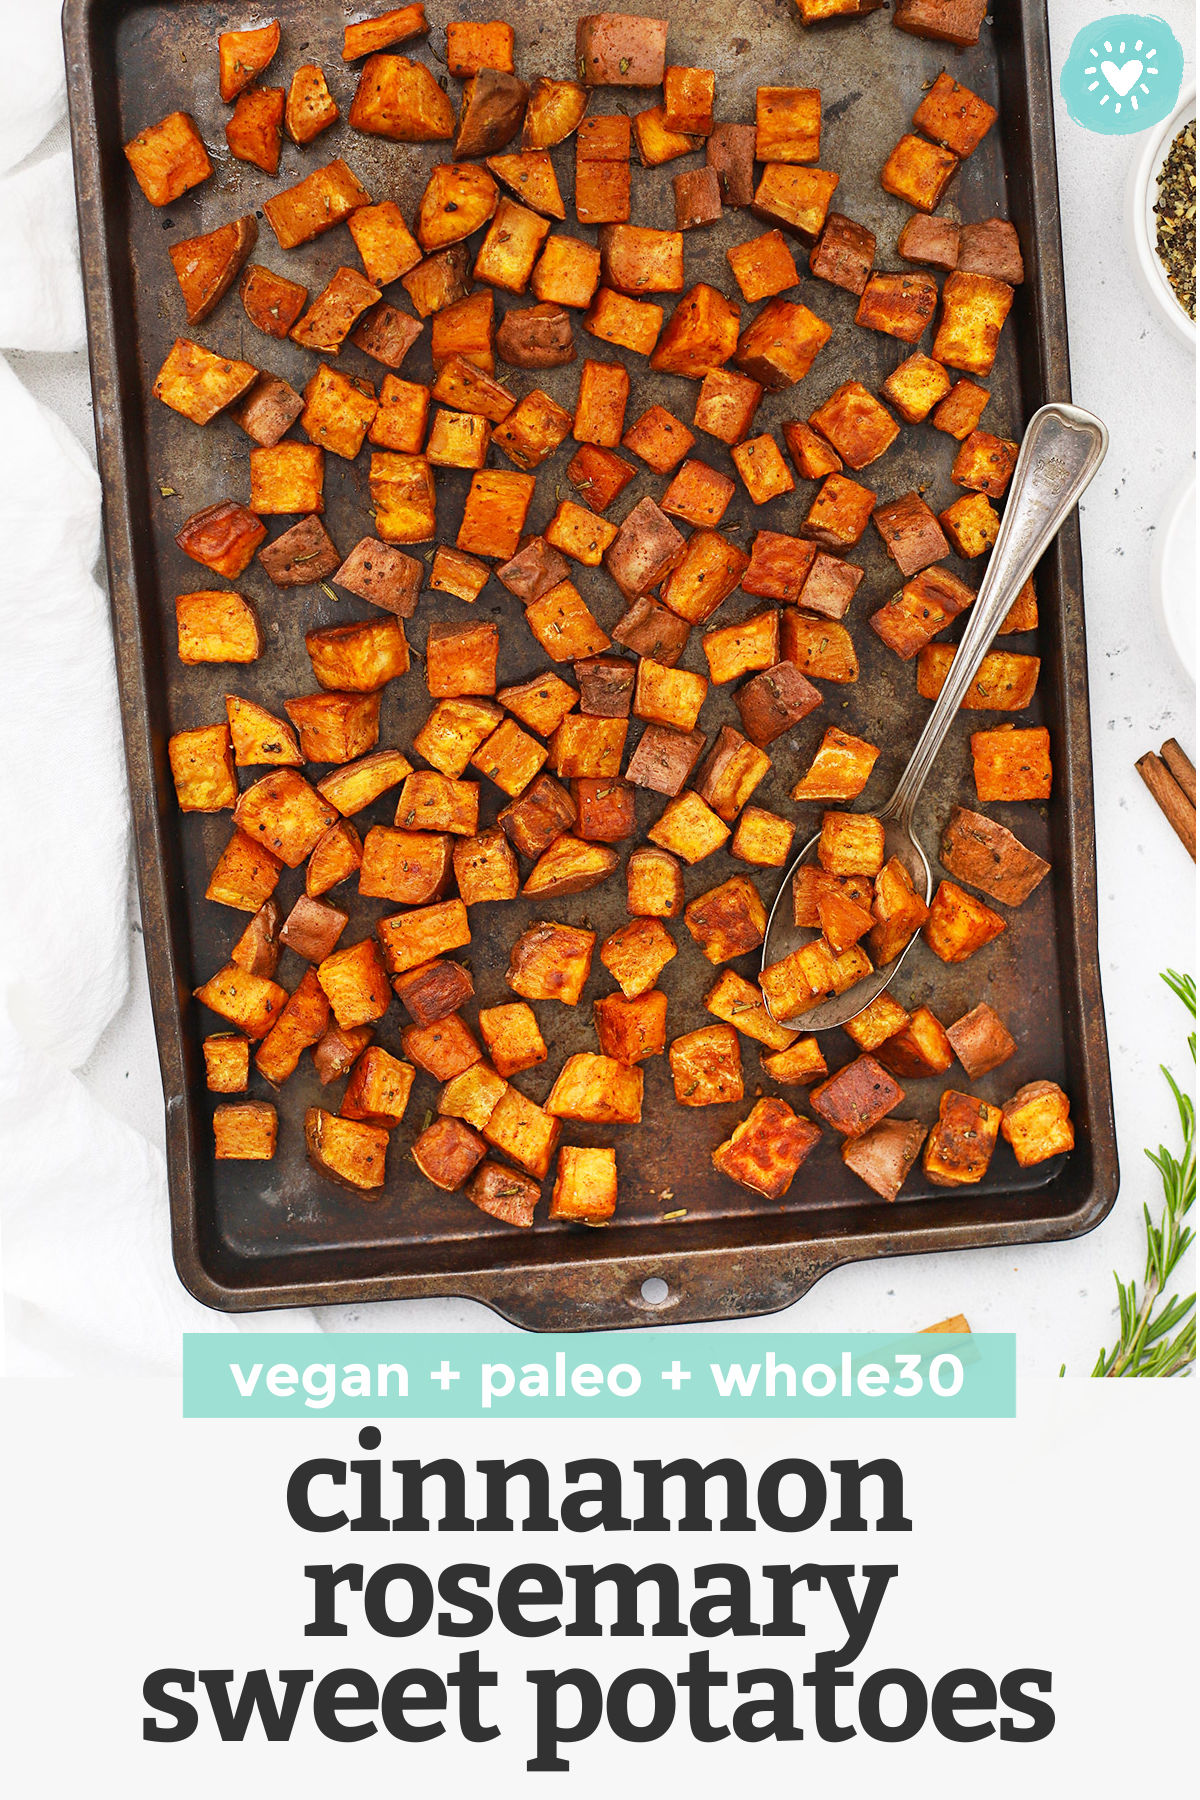 Cinnamon Rosemary Sweet Potatoes - These roasted rosemary sweet potatoes have a gorgeous caramelized texture and a delicious blend of flavors you'll crave over and over again. (Paleo, Vegan, Whole30) // Roasted Sweet Potatoes Recipe // Side Dish // Healthy Recipe #sweetpotatoes #sidedish #whole30 #vegan #paleo